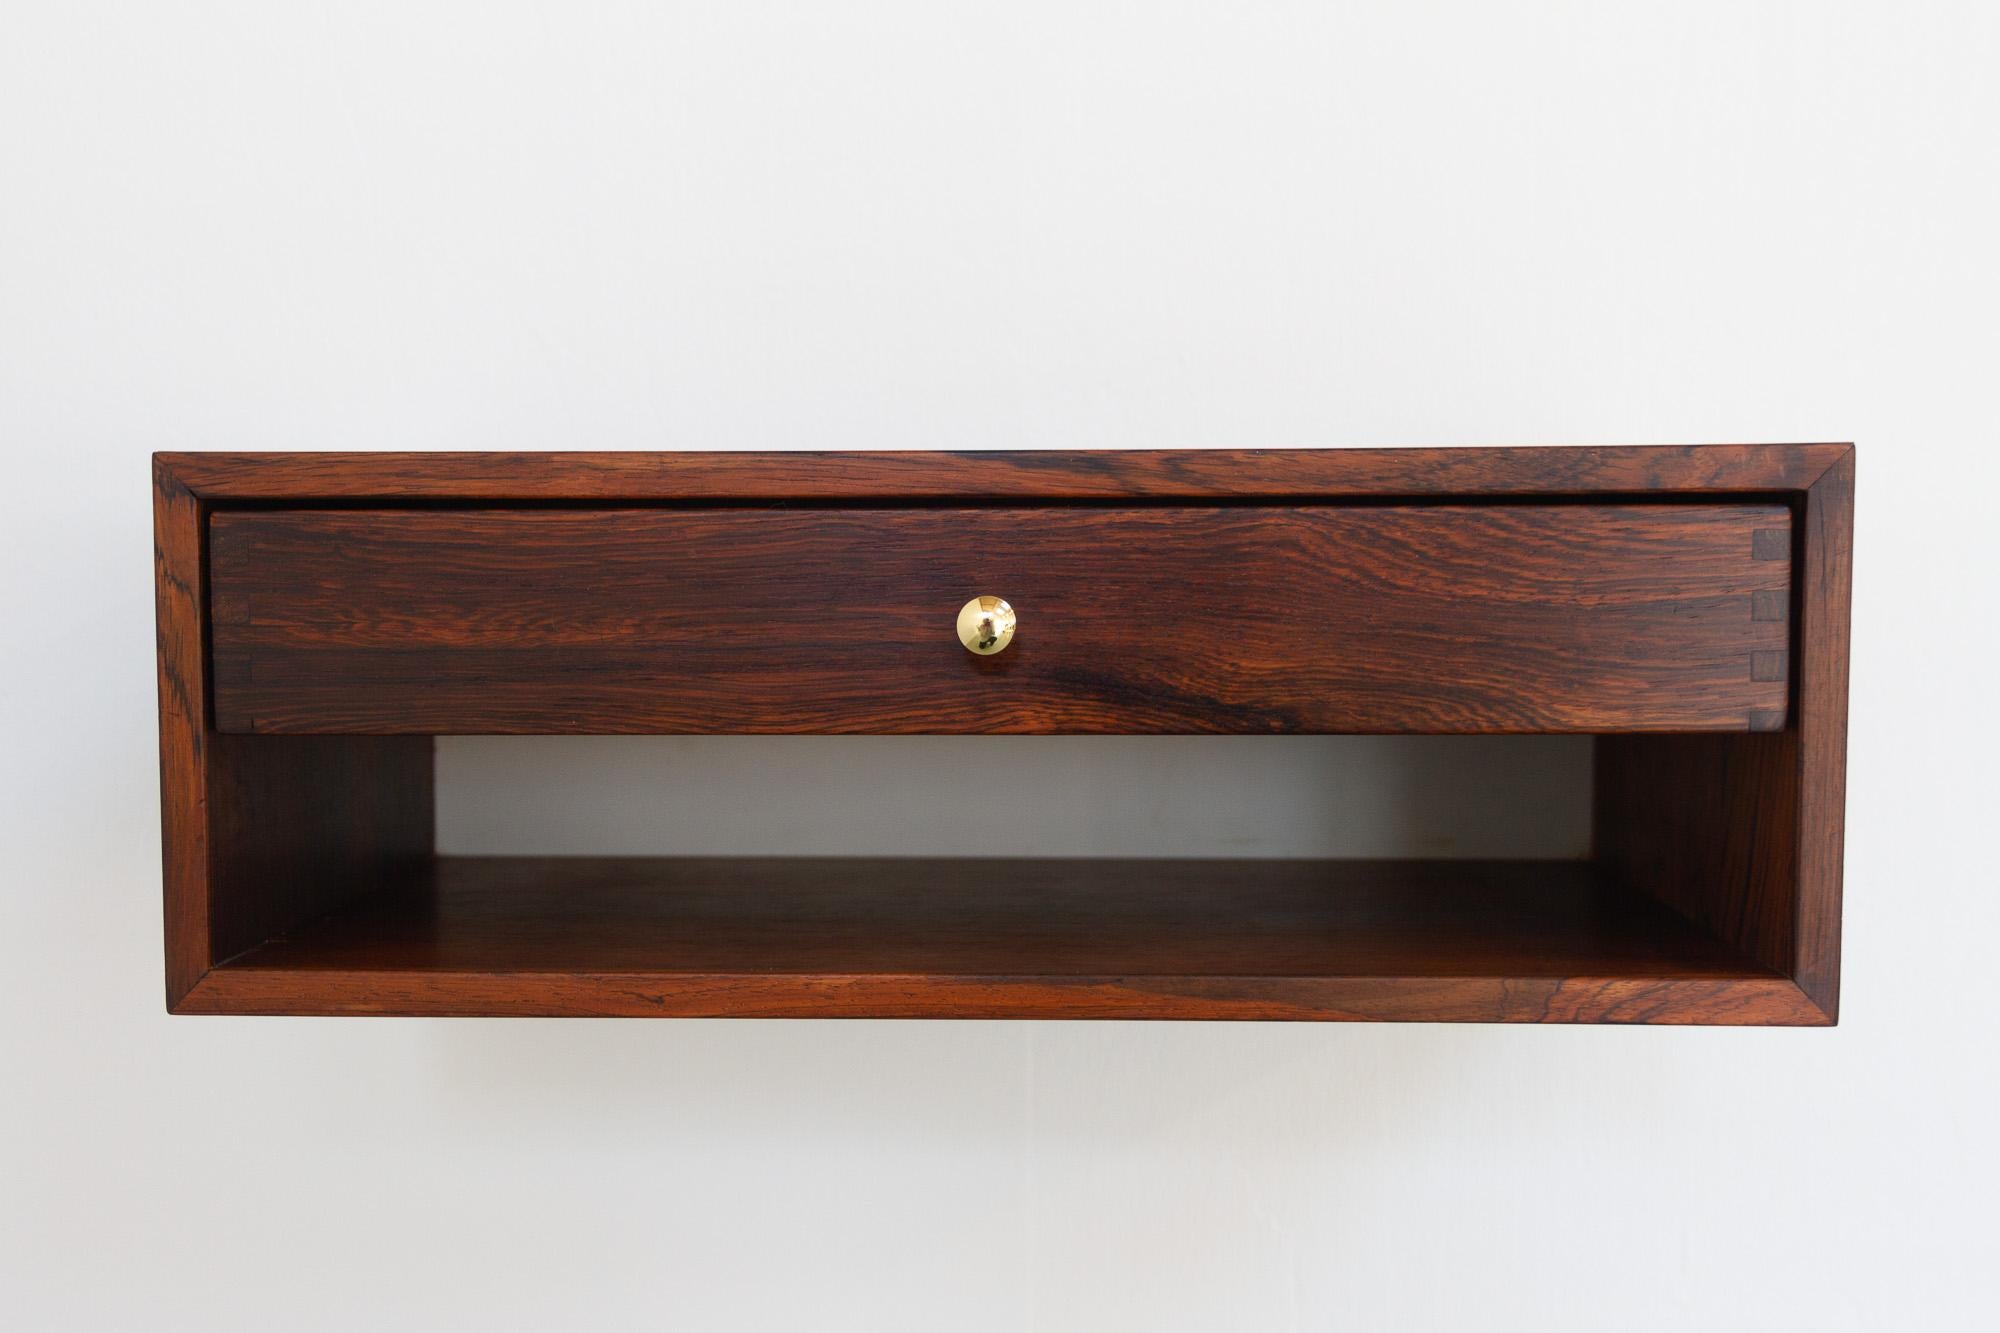 Danish Modern Floating Console by Kai Kristiansen for Aksel Kjersgaard, 1960s.
Elegant and stylish wall mounted shelf with one drawer in beautiful rich and expressive Rosewood veneer. Designed by Danish architect Kai Kristiansen and manufactured by